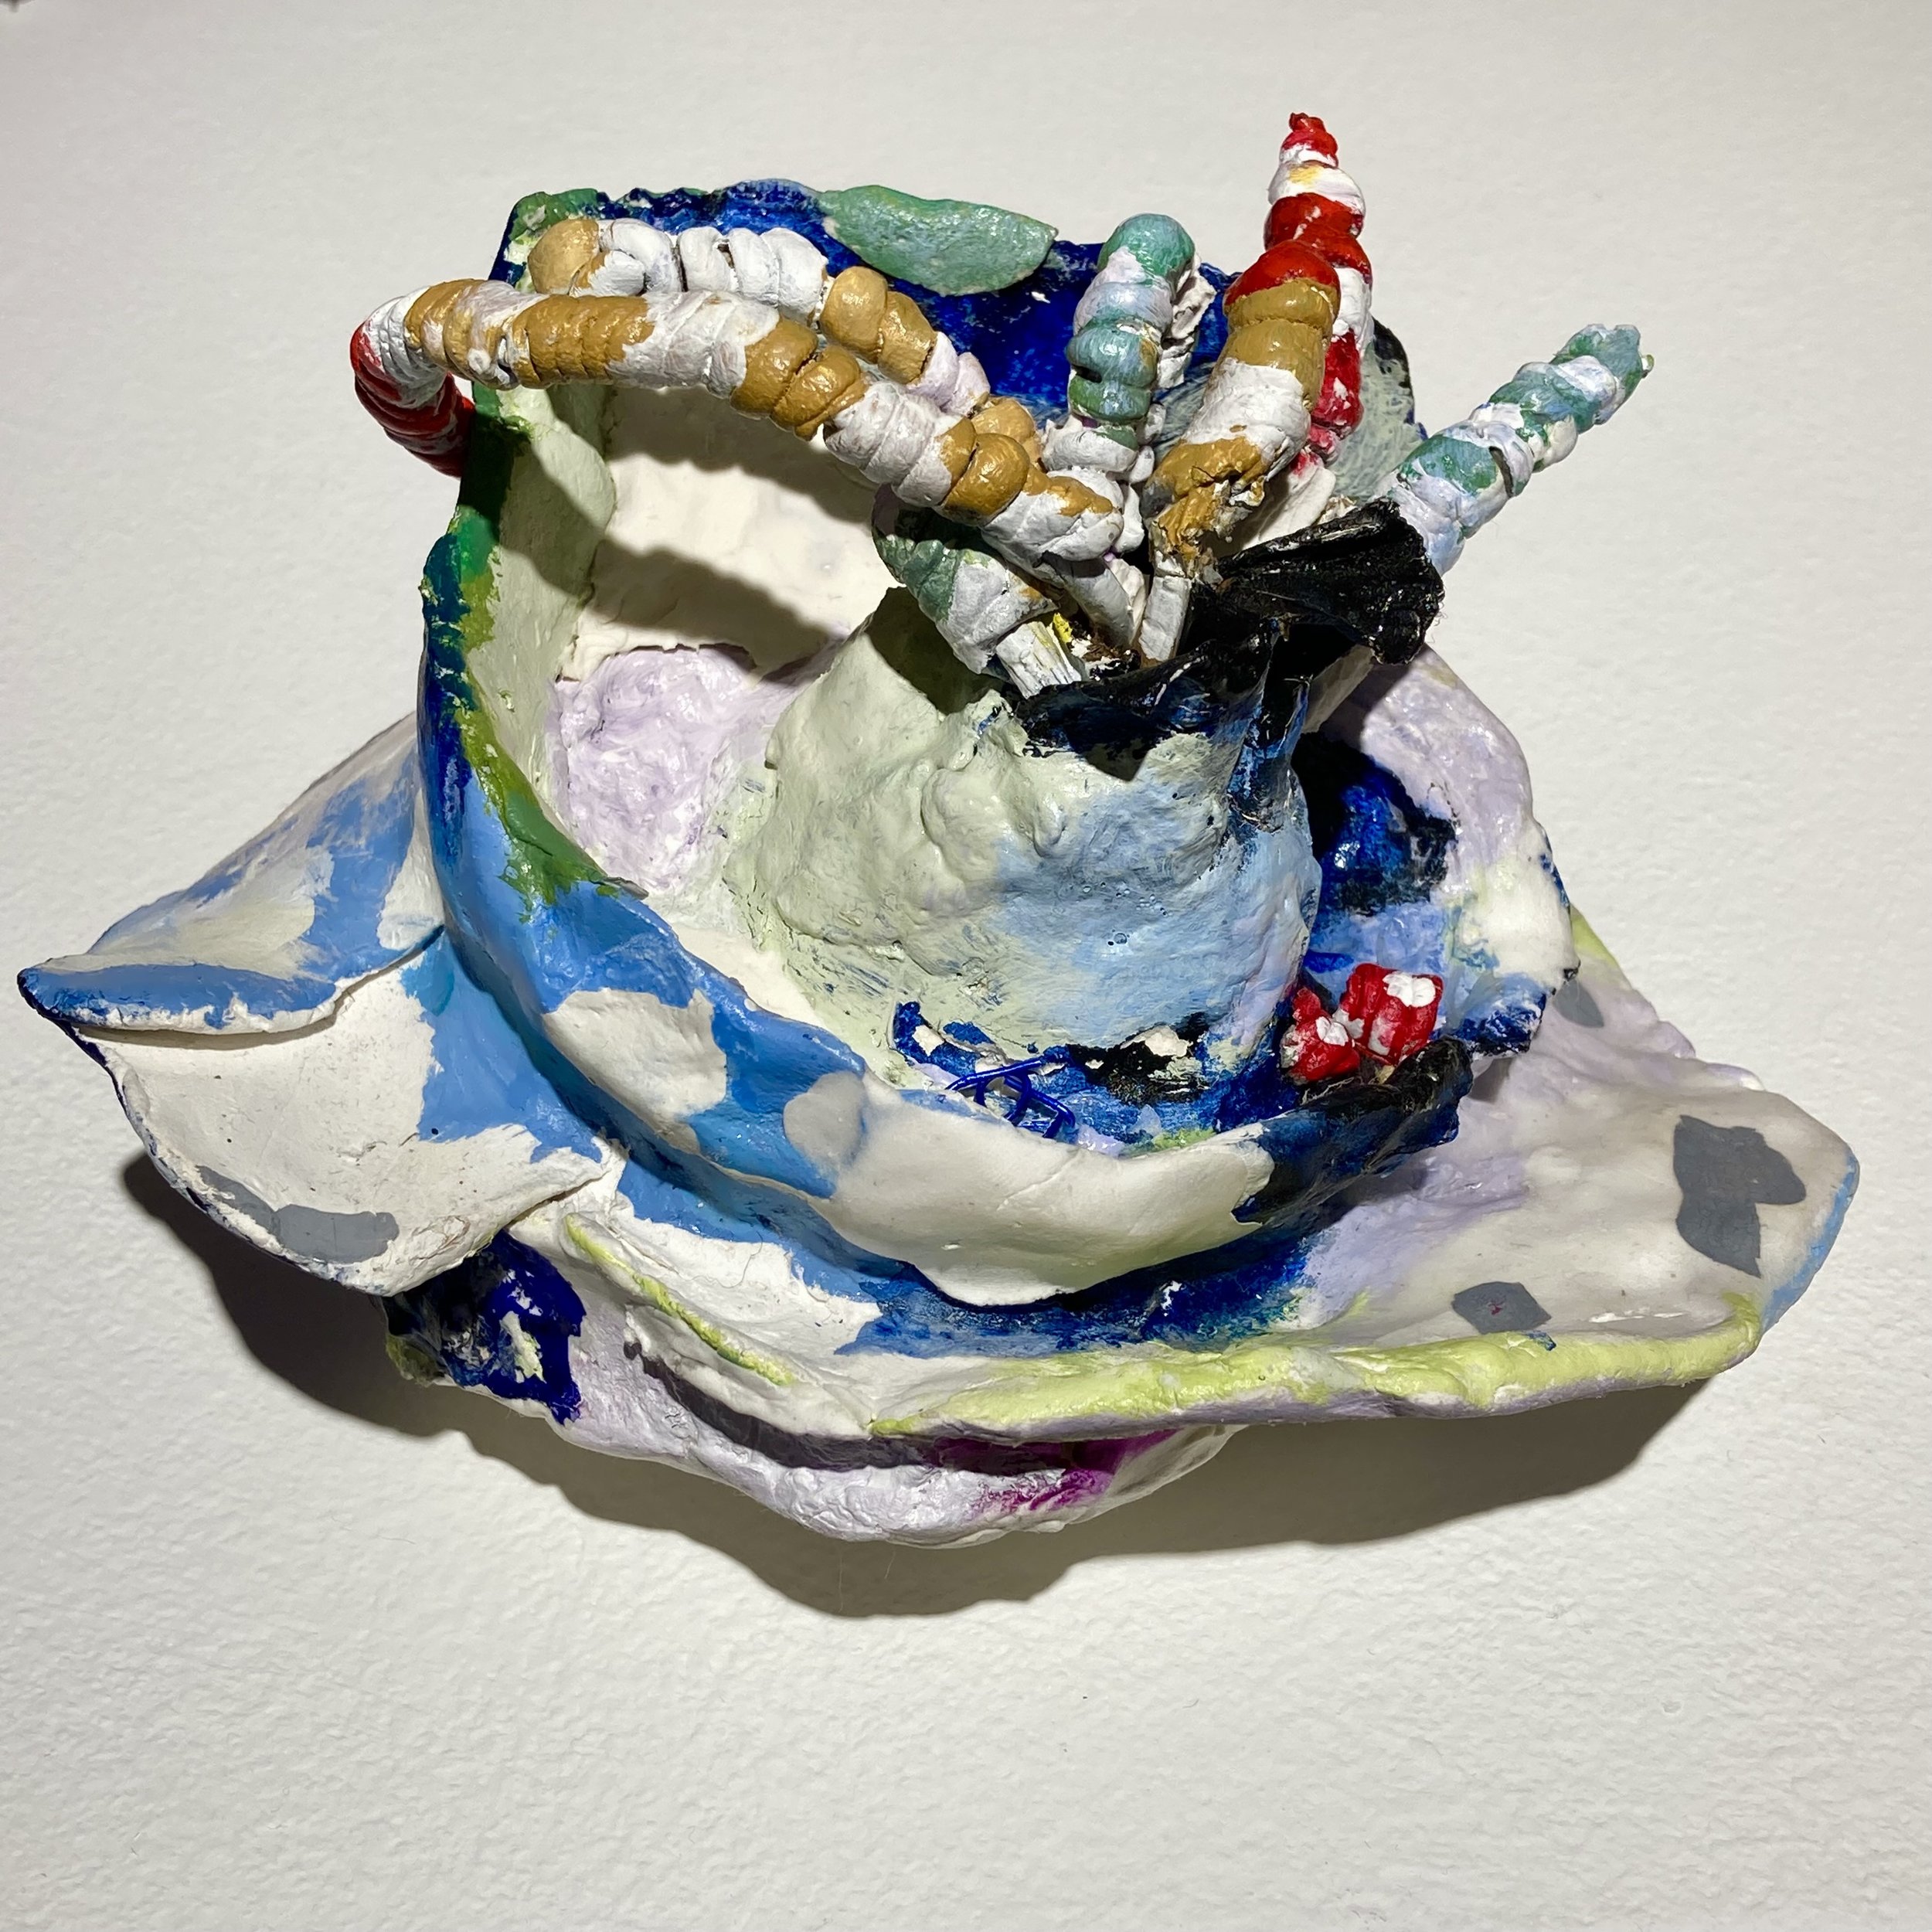 A Little Flower, acrylic, wire, clay and paper, 7 1:2” x 6” x5”, 2021.jpg